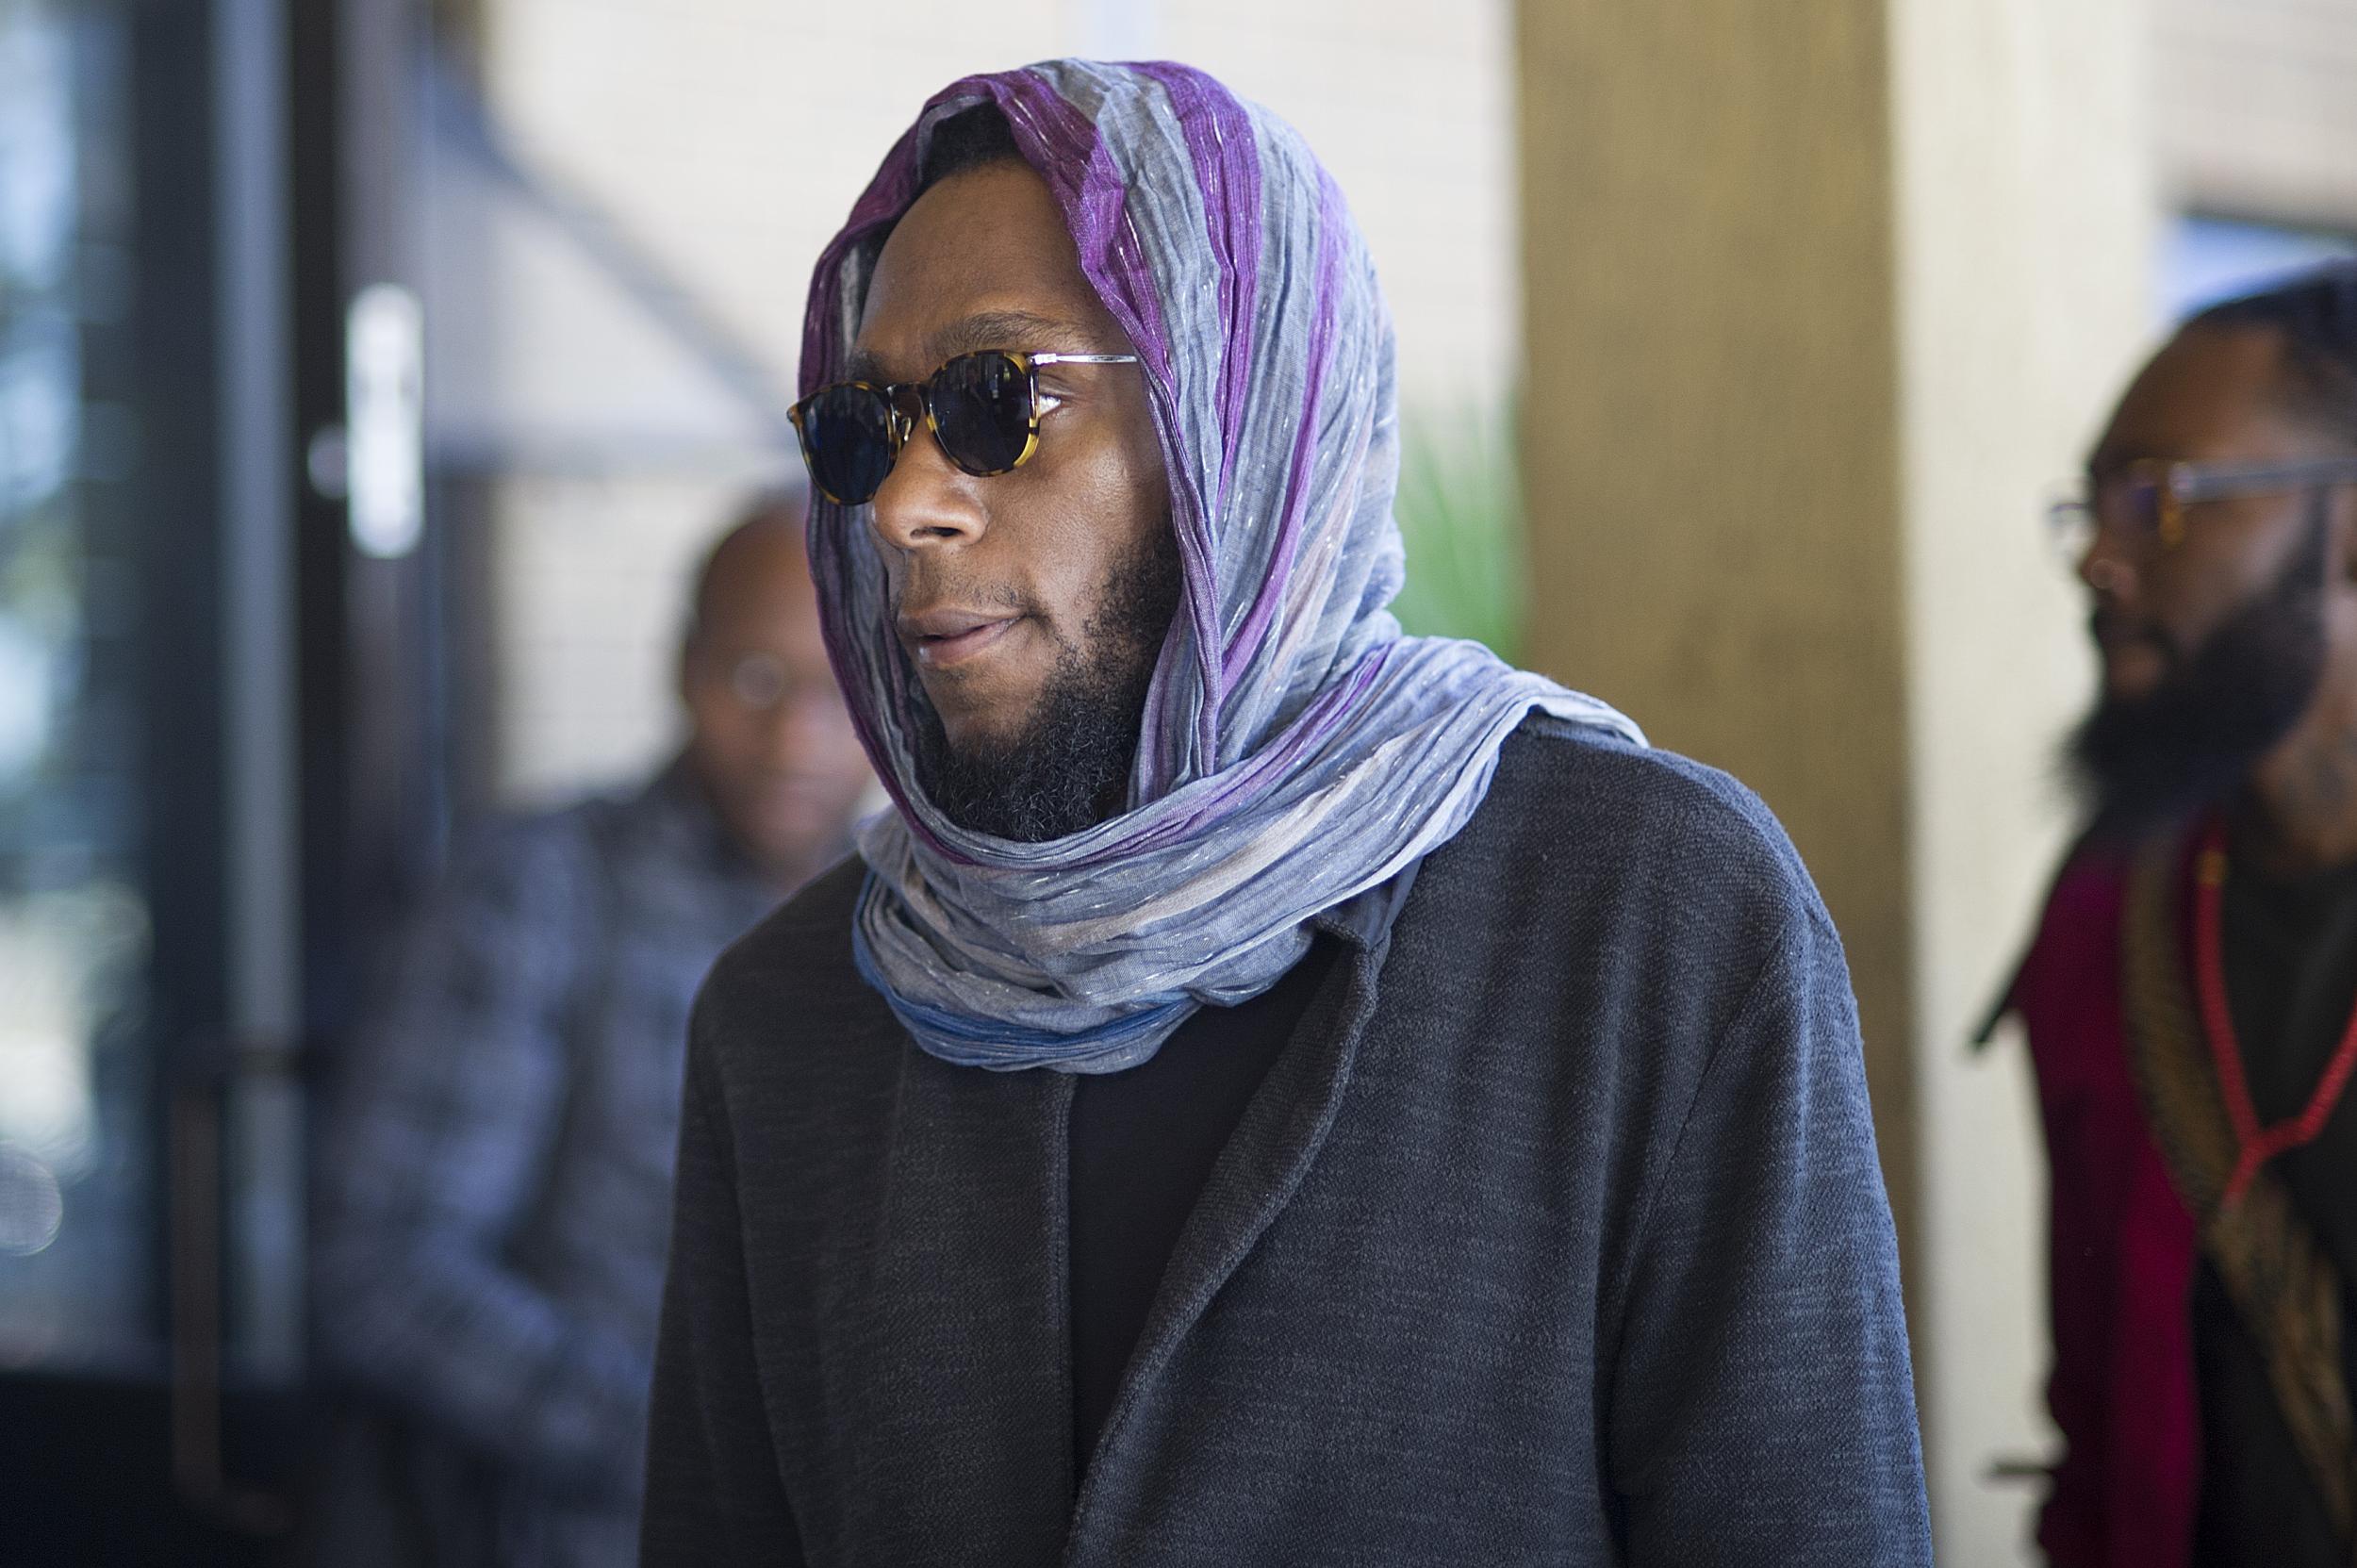 Yasiin Bey formerly known as Mos Def